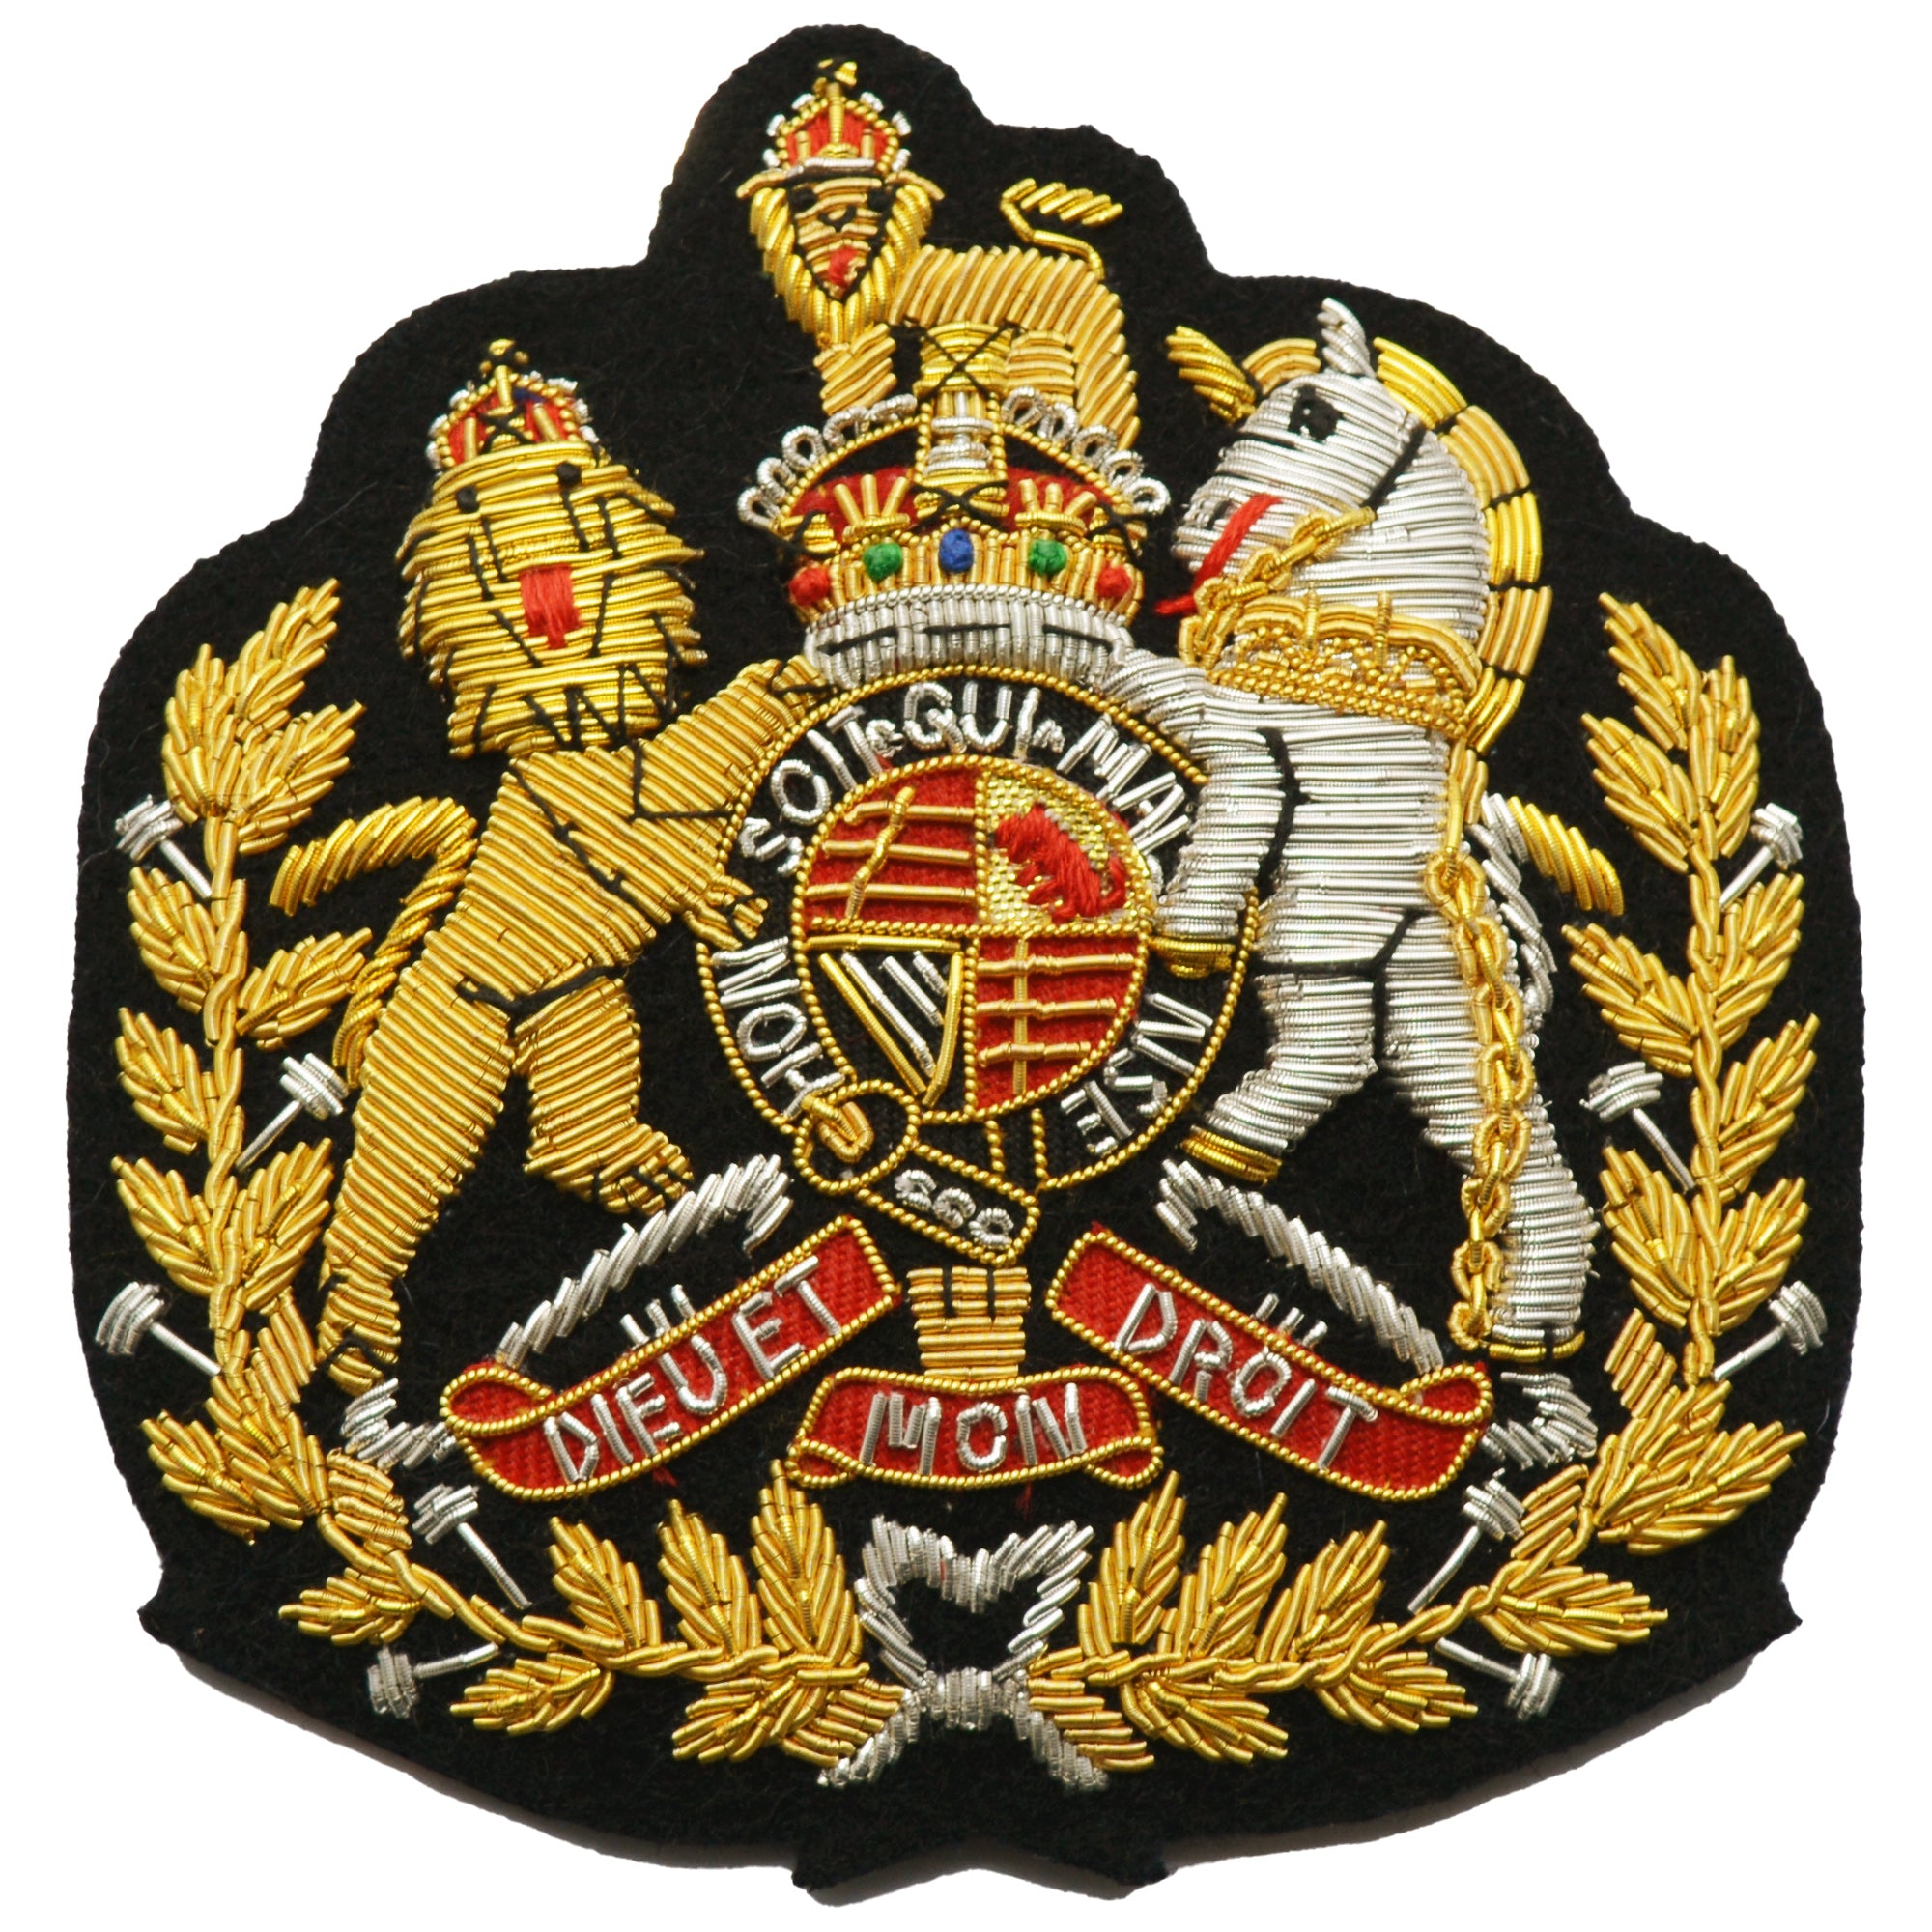 (Kings Crown) Corps and Command Regimental Sergeant Major (RSM) Royal Arms Rank Badge British Army and Royal Marines